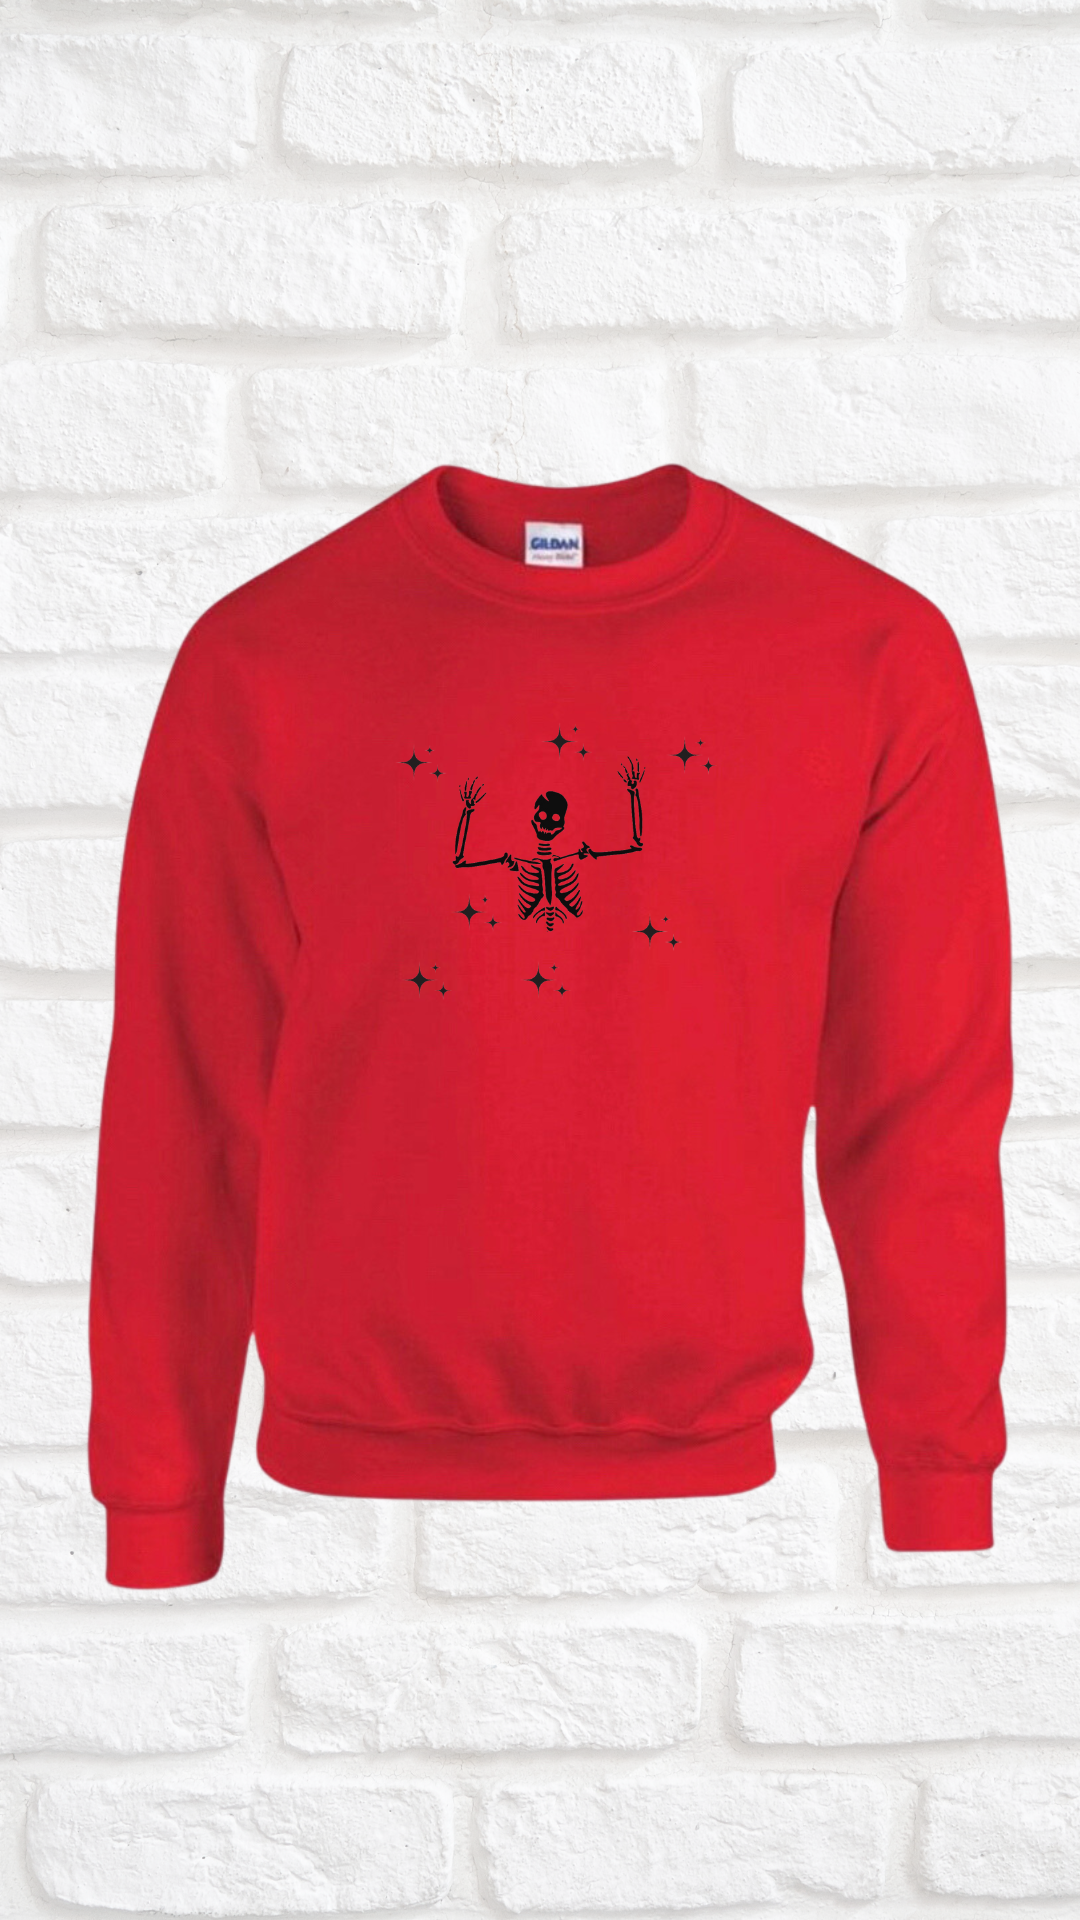 Custom Order for Natalie - ANTIQUE Cherry Red sweatshirt with pictured design size M